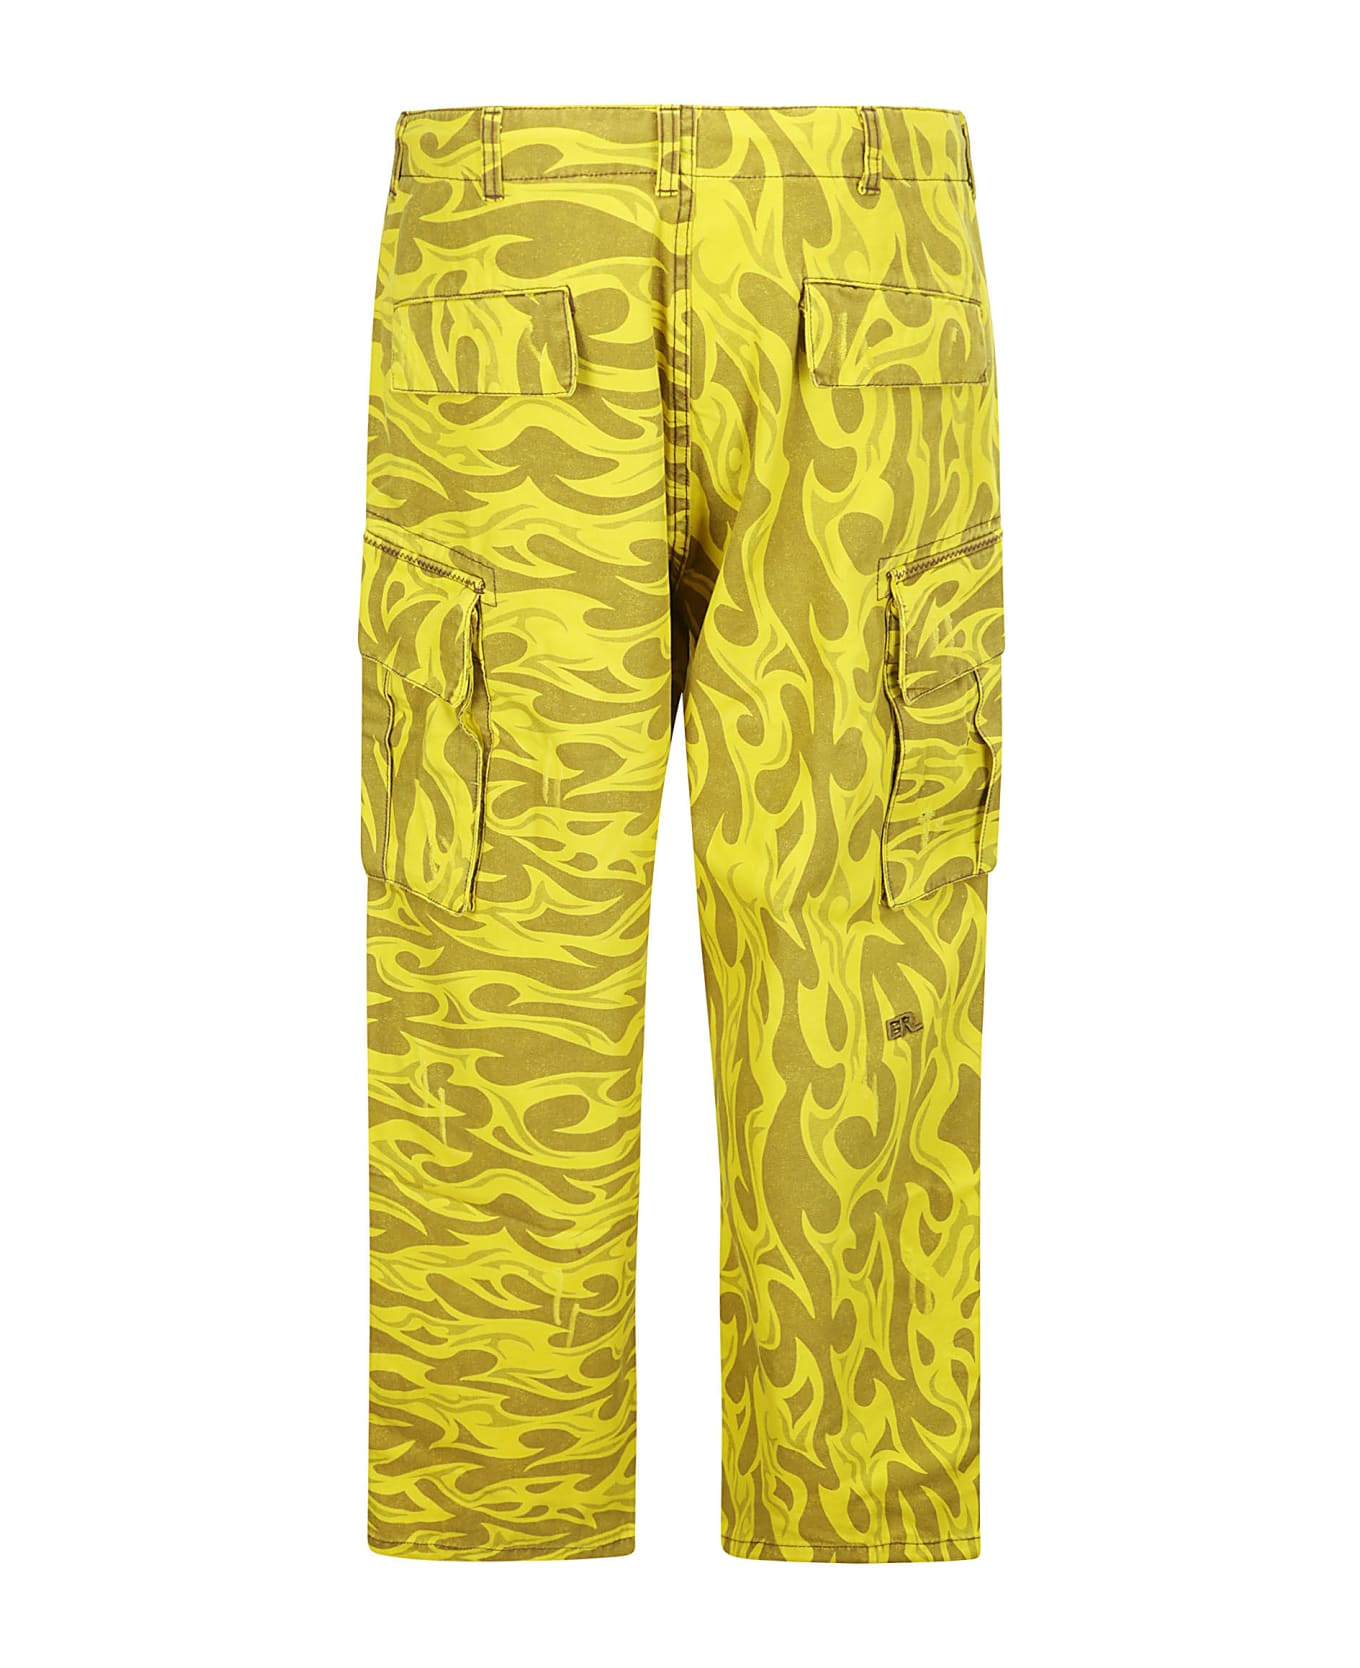 ERL Unisex Printed Cargo Pants Woven - YELLOW FLAME